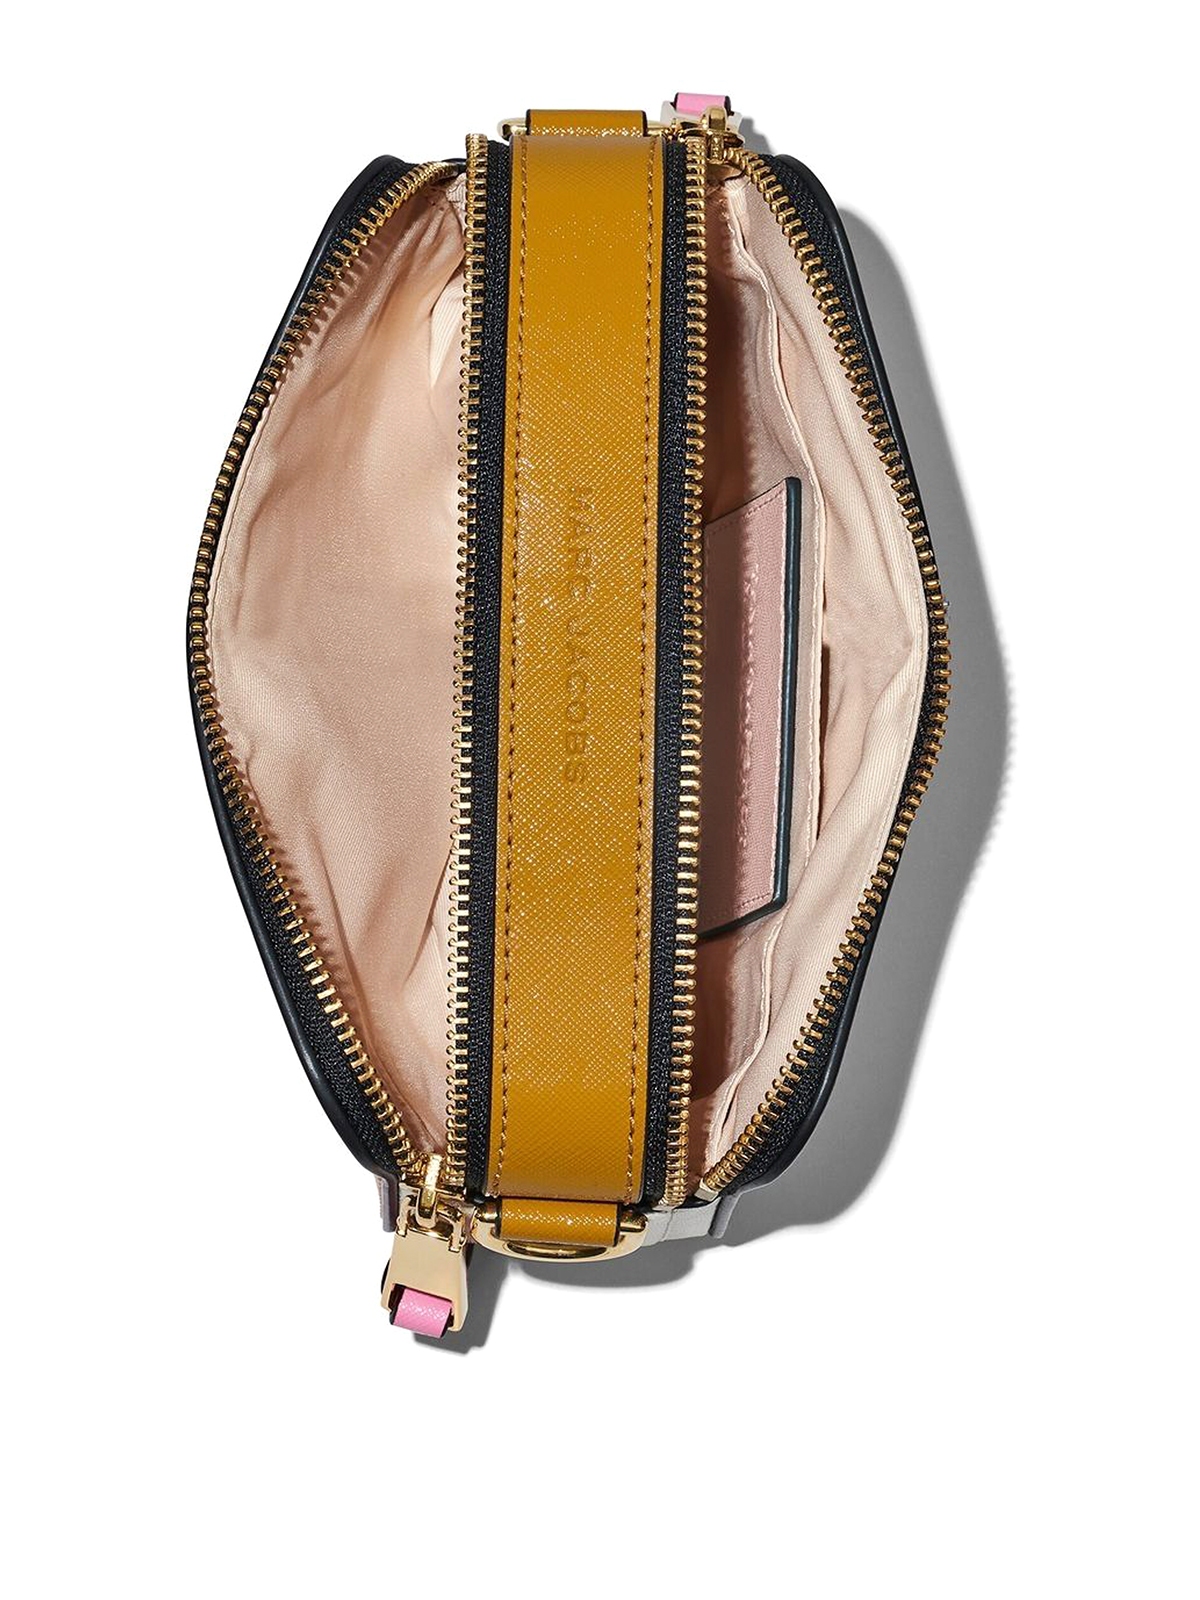 Snapshot of Marc Jacobs - Grey and pink leather bag with zippers